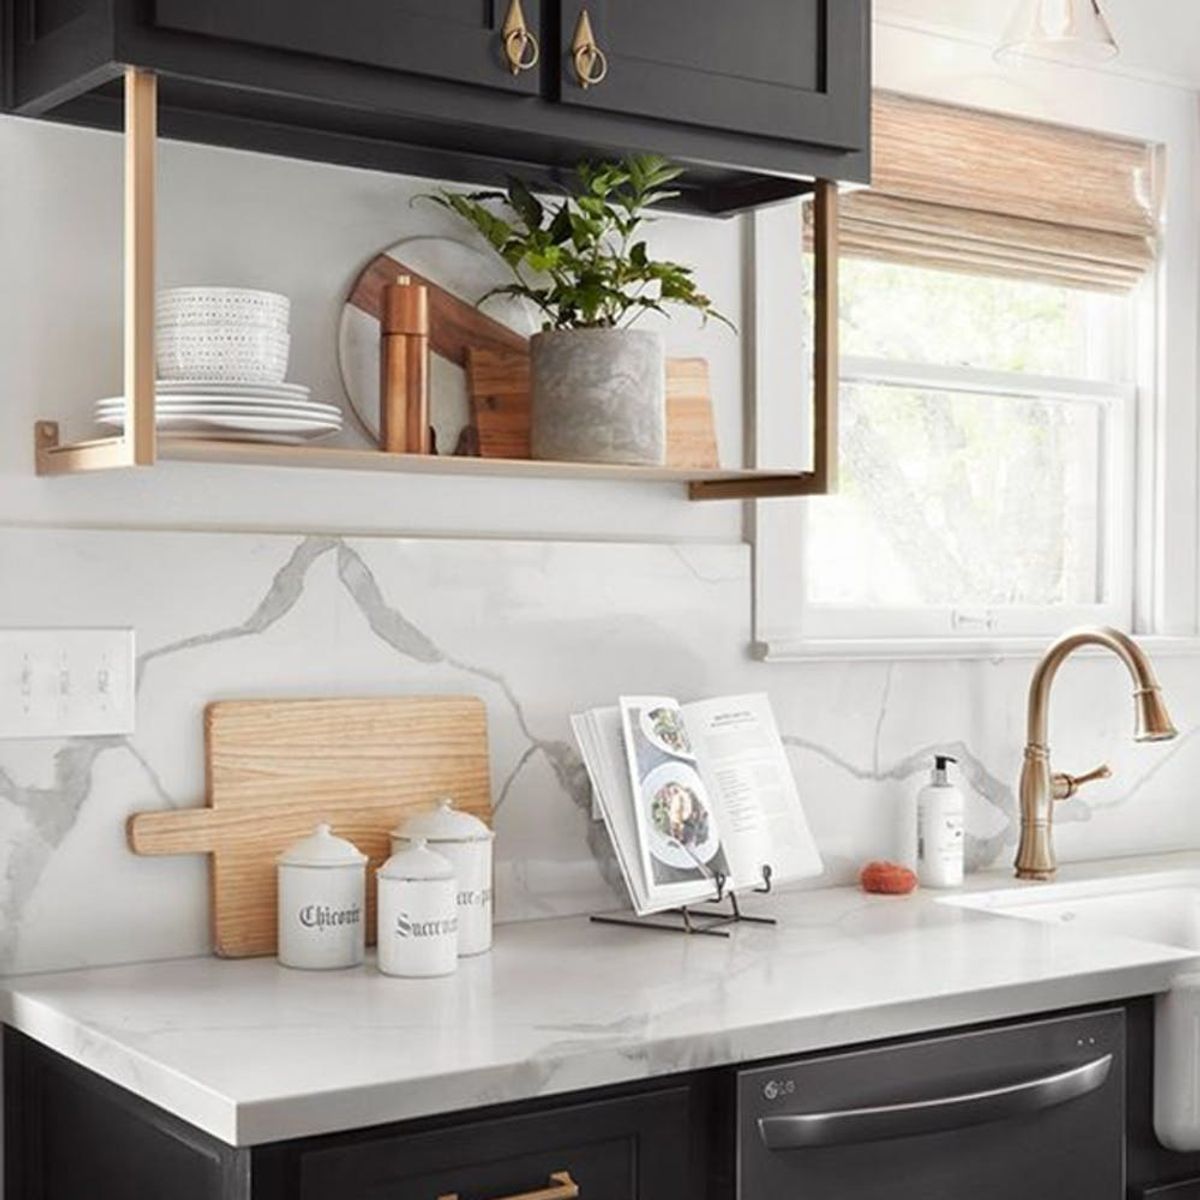 5 Kitchen Trends That Are Going to Dominate in 2019